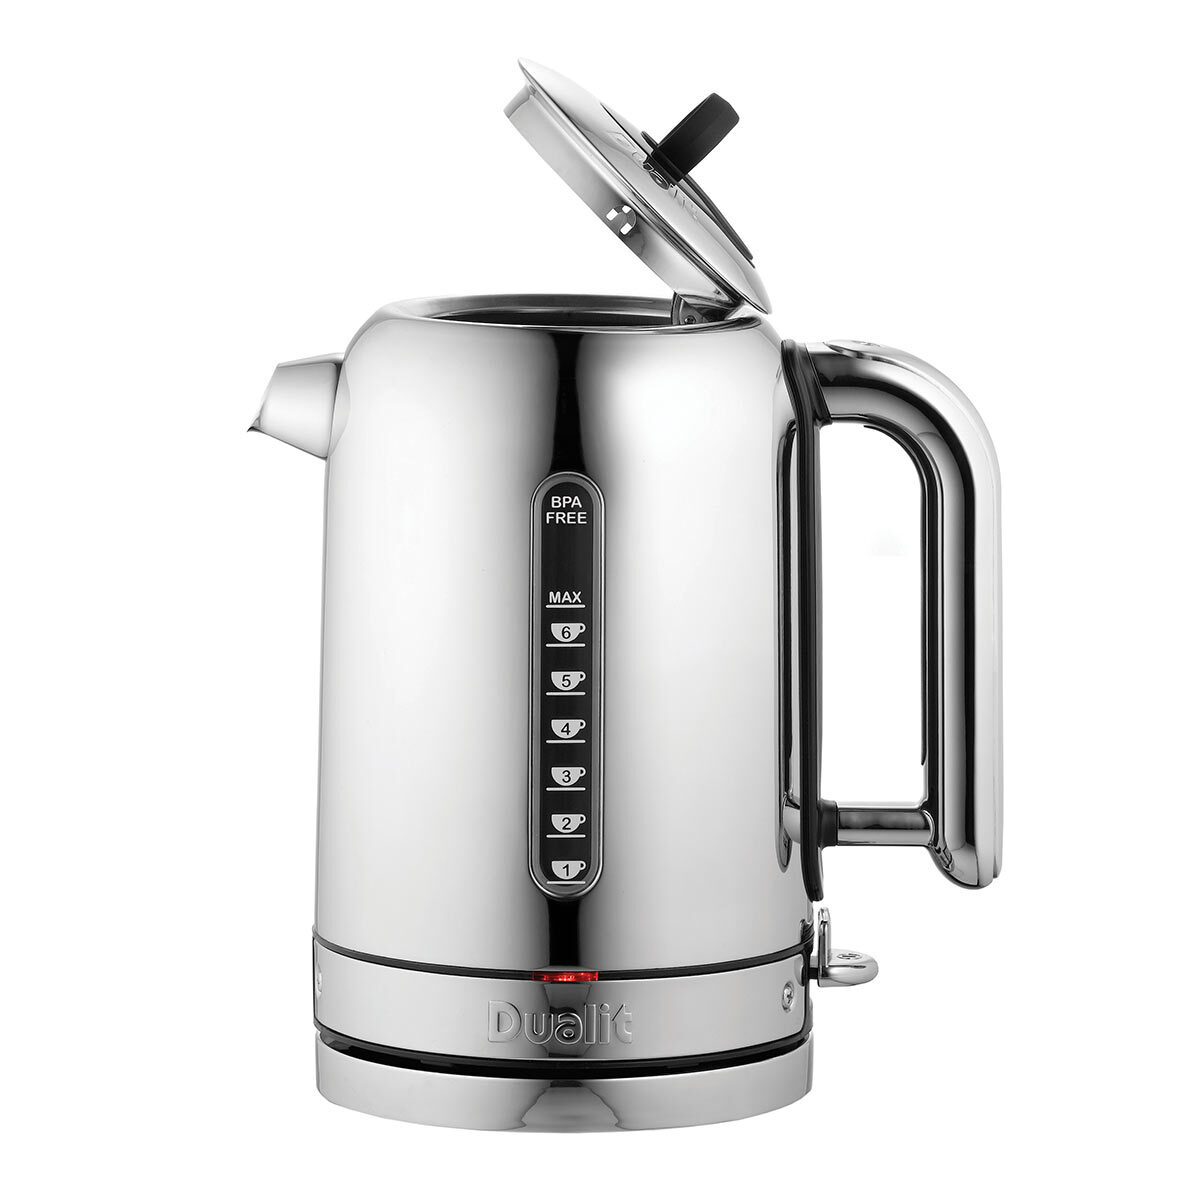 Dash 1.7-Liter Insulated Electric Kettle White